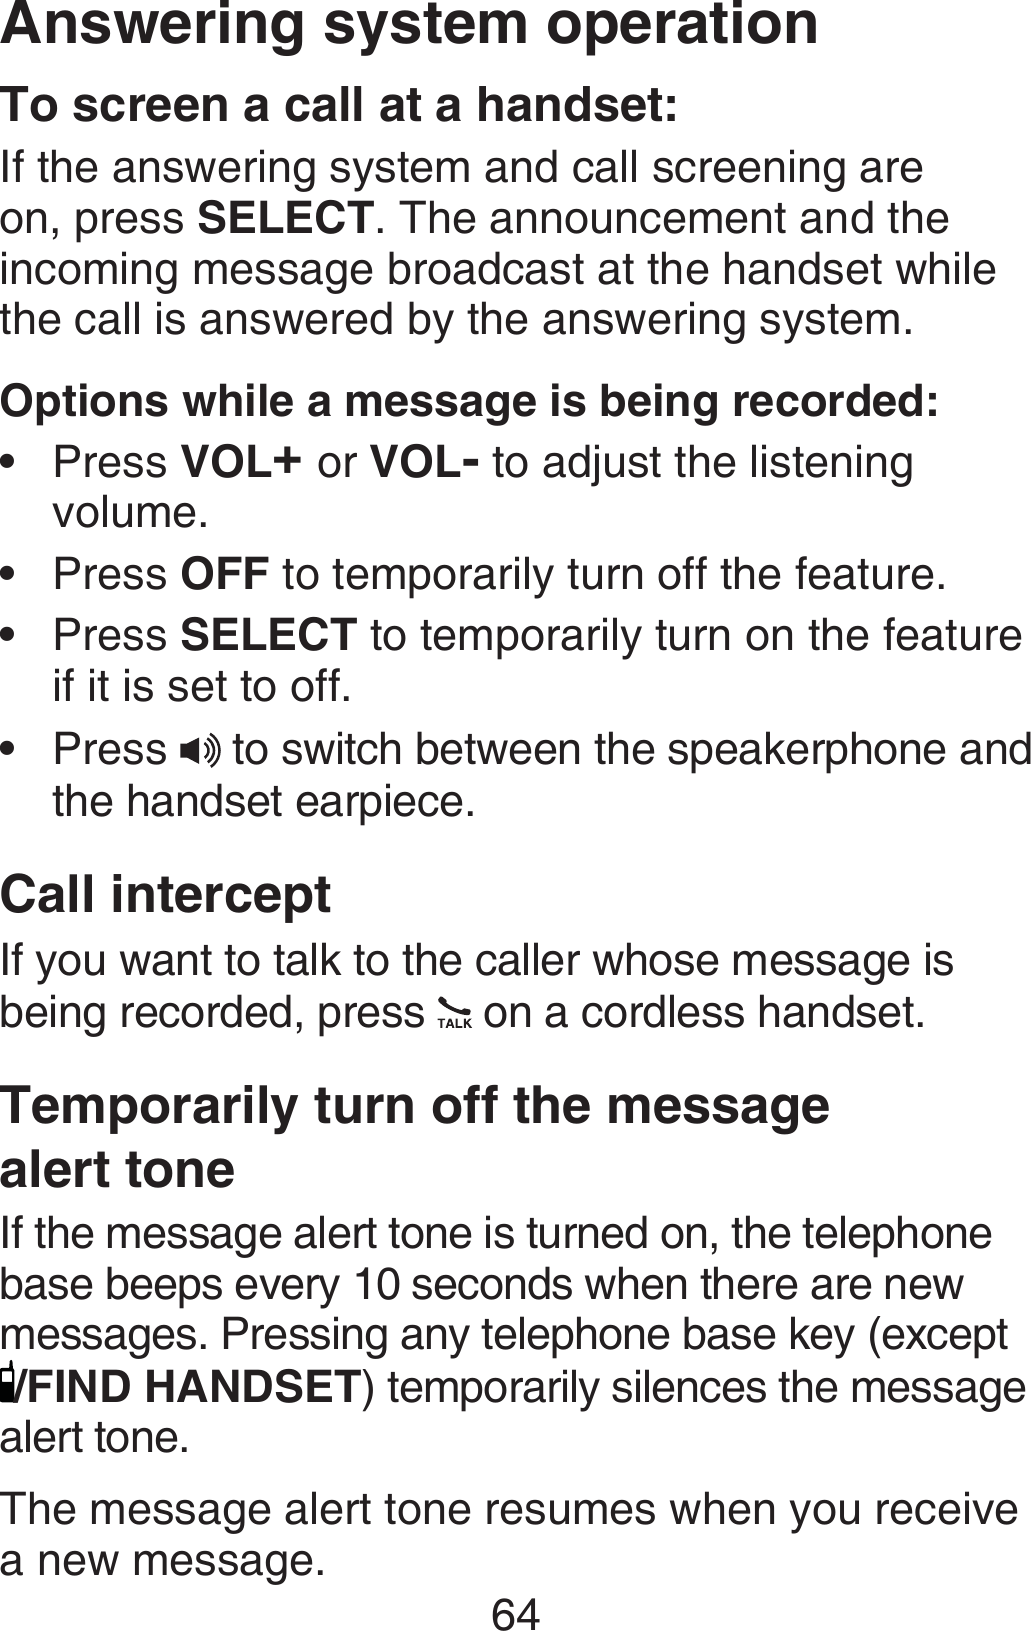 64Answering system operationTo screen a call at a handset:If the answering system and call screening are on, press SELECT. The announcement and the incoming message broadcast at the handset while the call is answered by the answering system.Options while a message is being recorded:Press VOL+ or VOL- to adjust the listening volume.Press OFF to temporarily turn off the feature.Press SELECT to temporarily turn on the feature if it is set to off.Press   to switch between the speakerphone and the handset earpiece.Call interceptIf you want to talk to the caller whose message is being recorded, press   on a cordless handset.Temporarily turn off the message  alert toneIf the message alert tone is turned on, the telephone base beeps every 10 seconds when there are new messages. Pressing any telephone base key (except /FIND HANDSET) temporarily silences the message alert tone.The message alert tone resumes when you receive a new message.••••